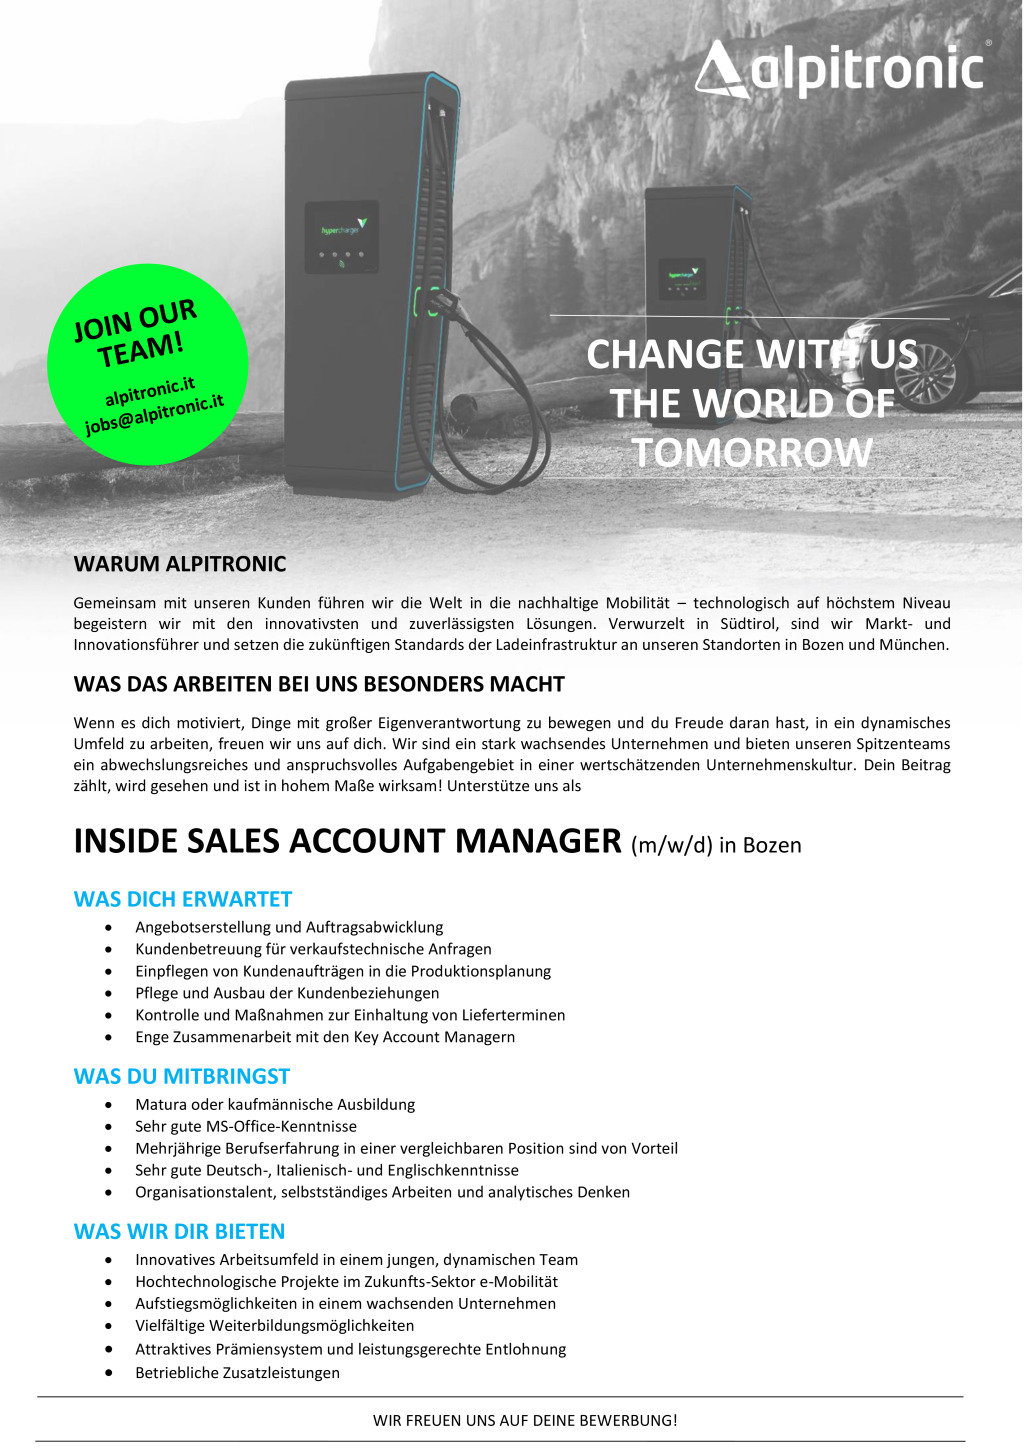 Inside Sales Account Manager (m/w/d)